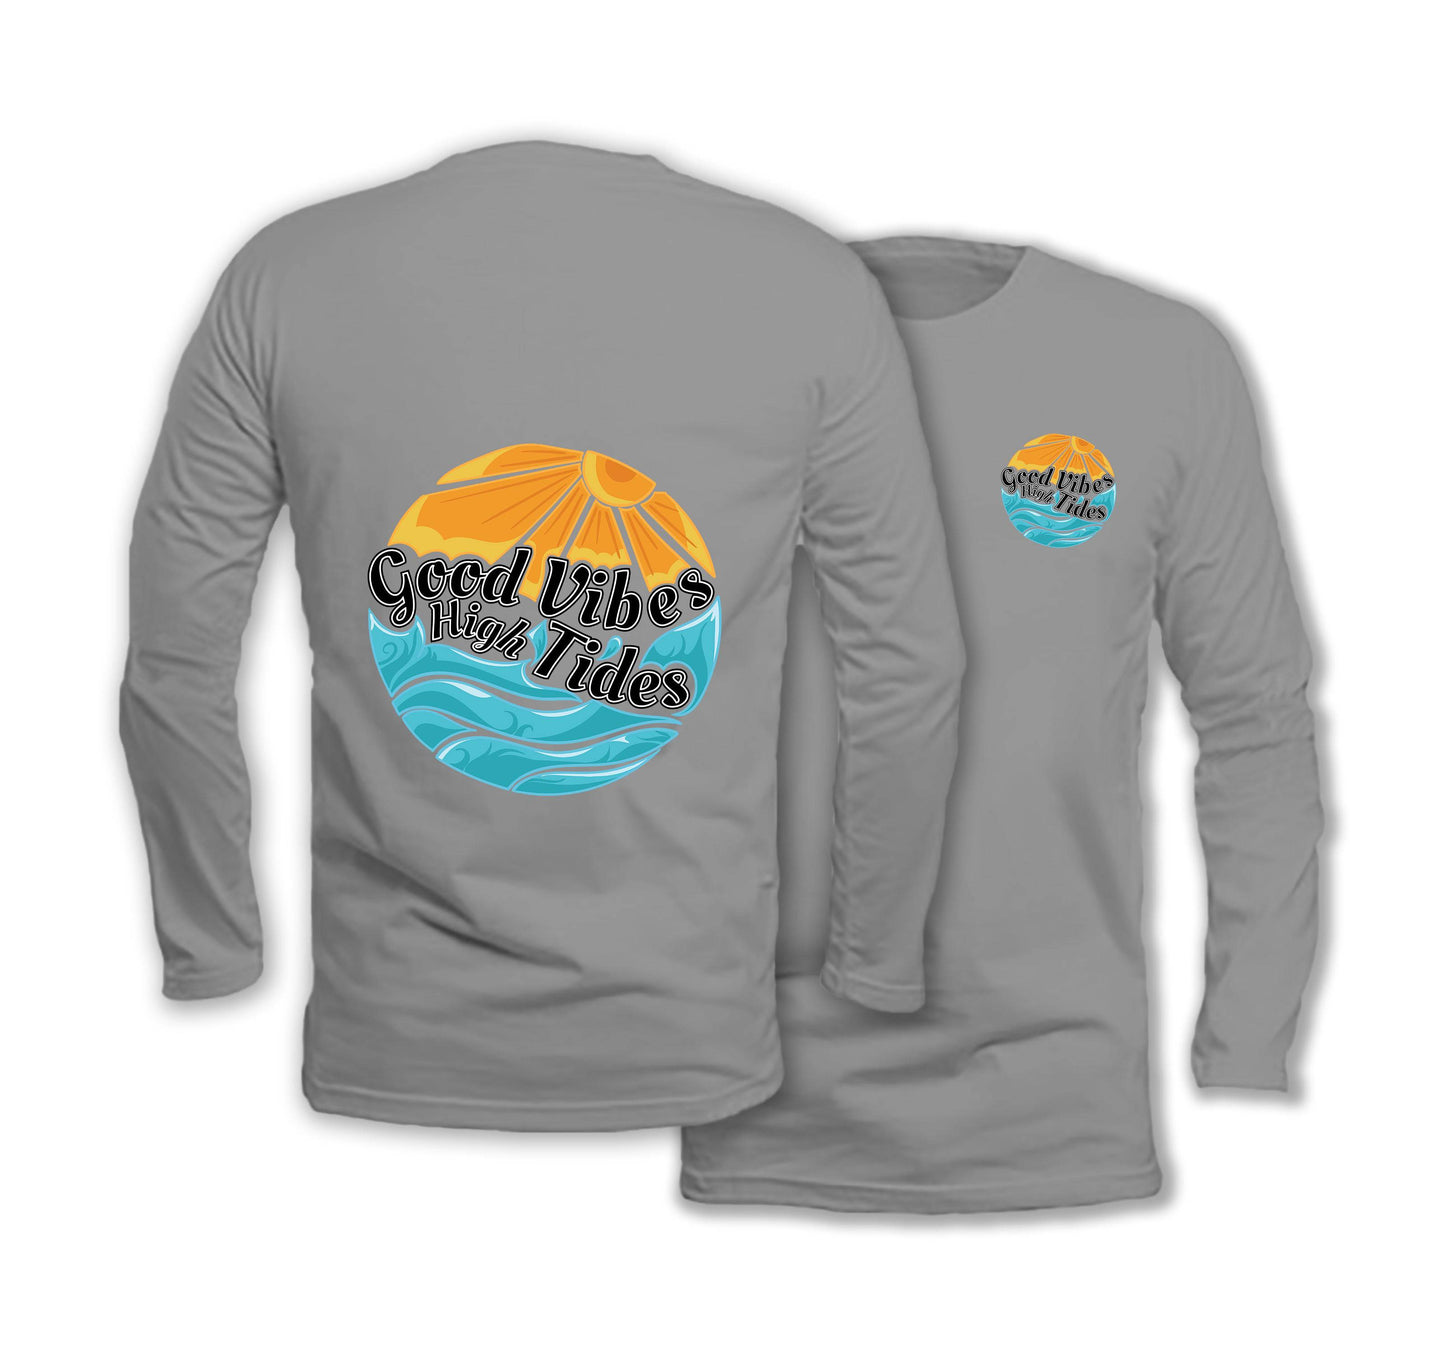 Good Vibes With High Tides - Long Sleeve Organic Cotton T-Shirt - One Choice Apparel